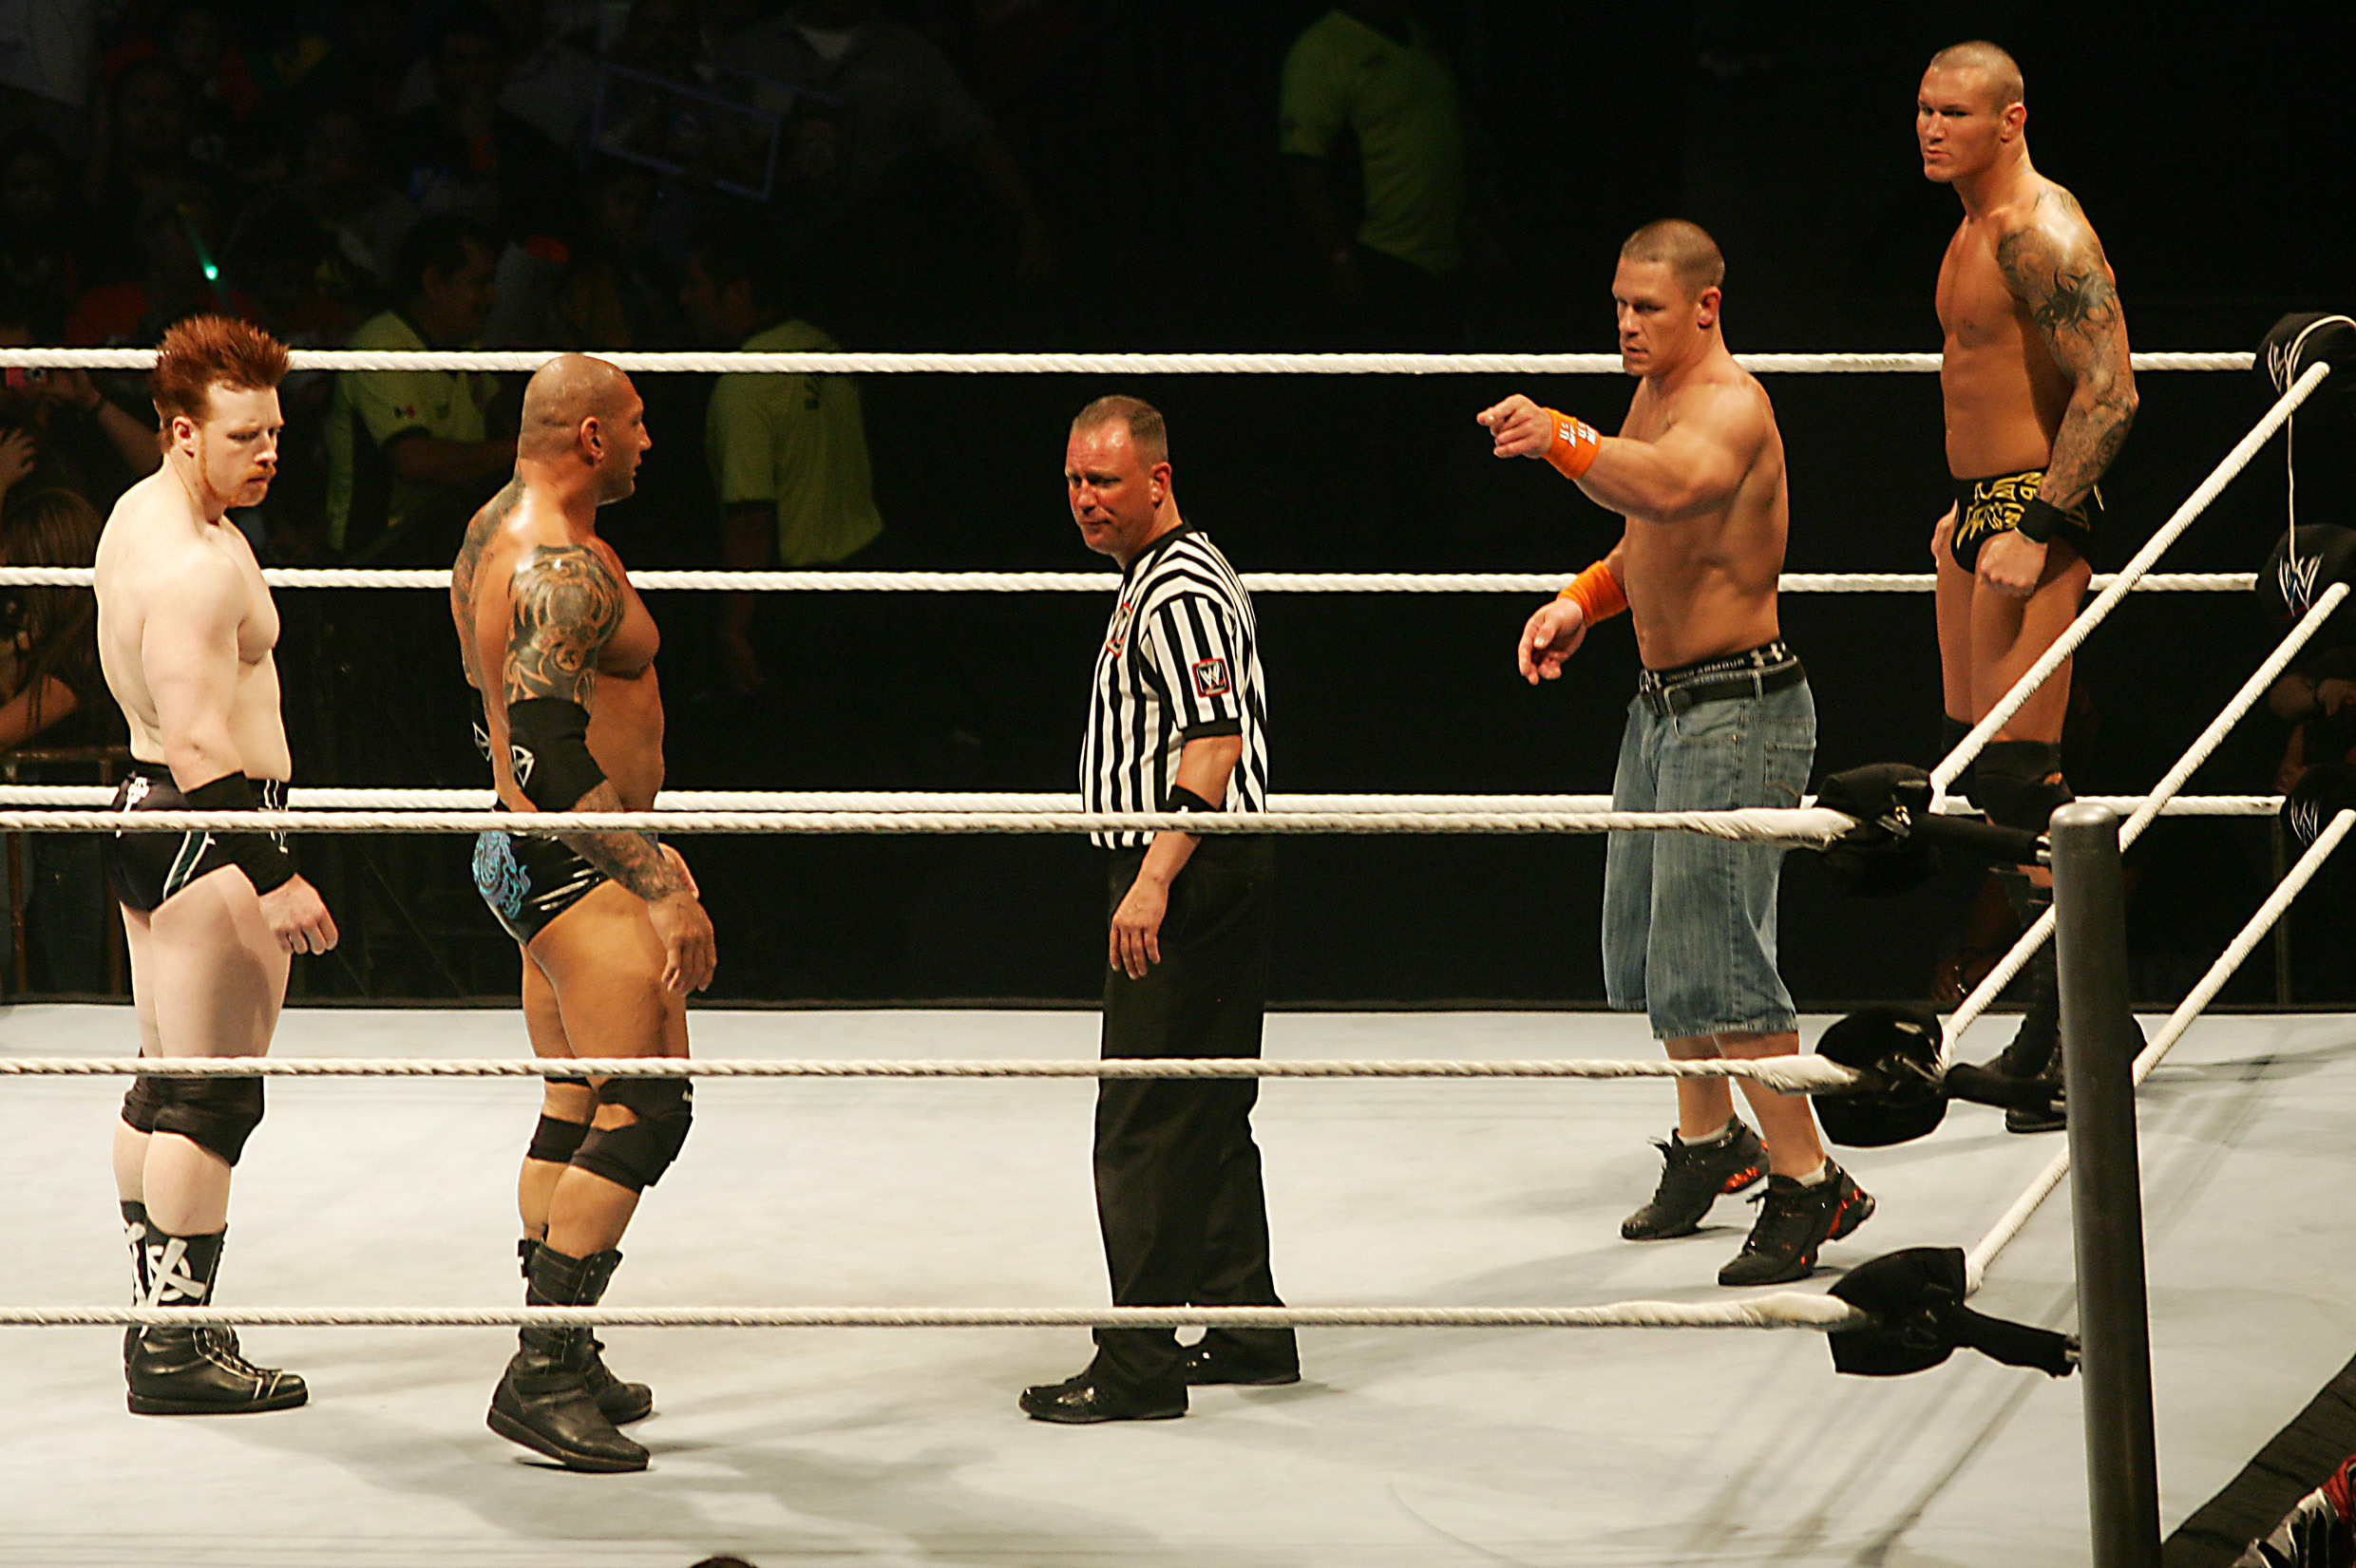 MONTERREY, MEXICO - MAY 05: Wrestling fighters (L-R) Sheamus, Batista, John Cena and Batista fight during the WWE RAW wrestling function on May 5, 2010 in Monterrey, Mexico. (Photo by Alfredo Lopez/Jam Media/LatinContent/Getty Images)